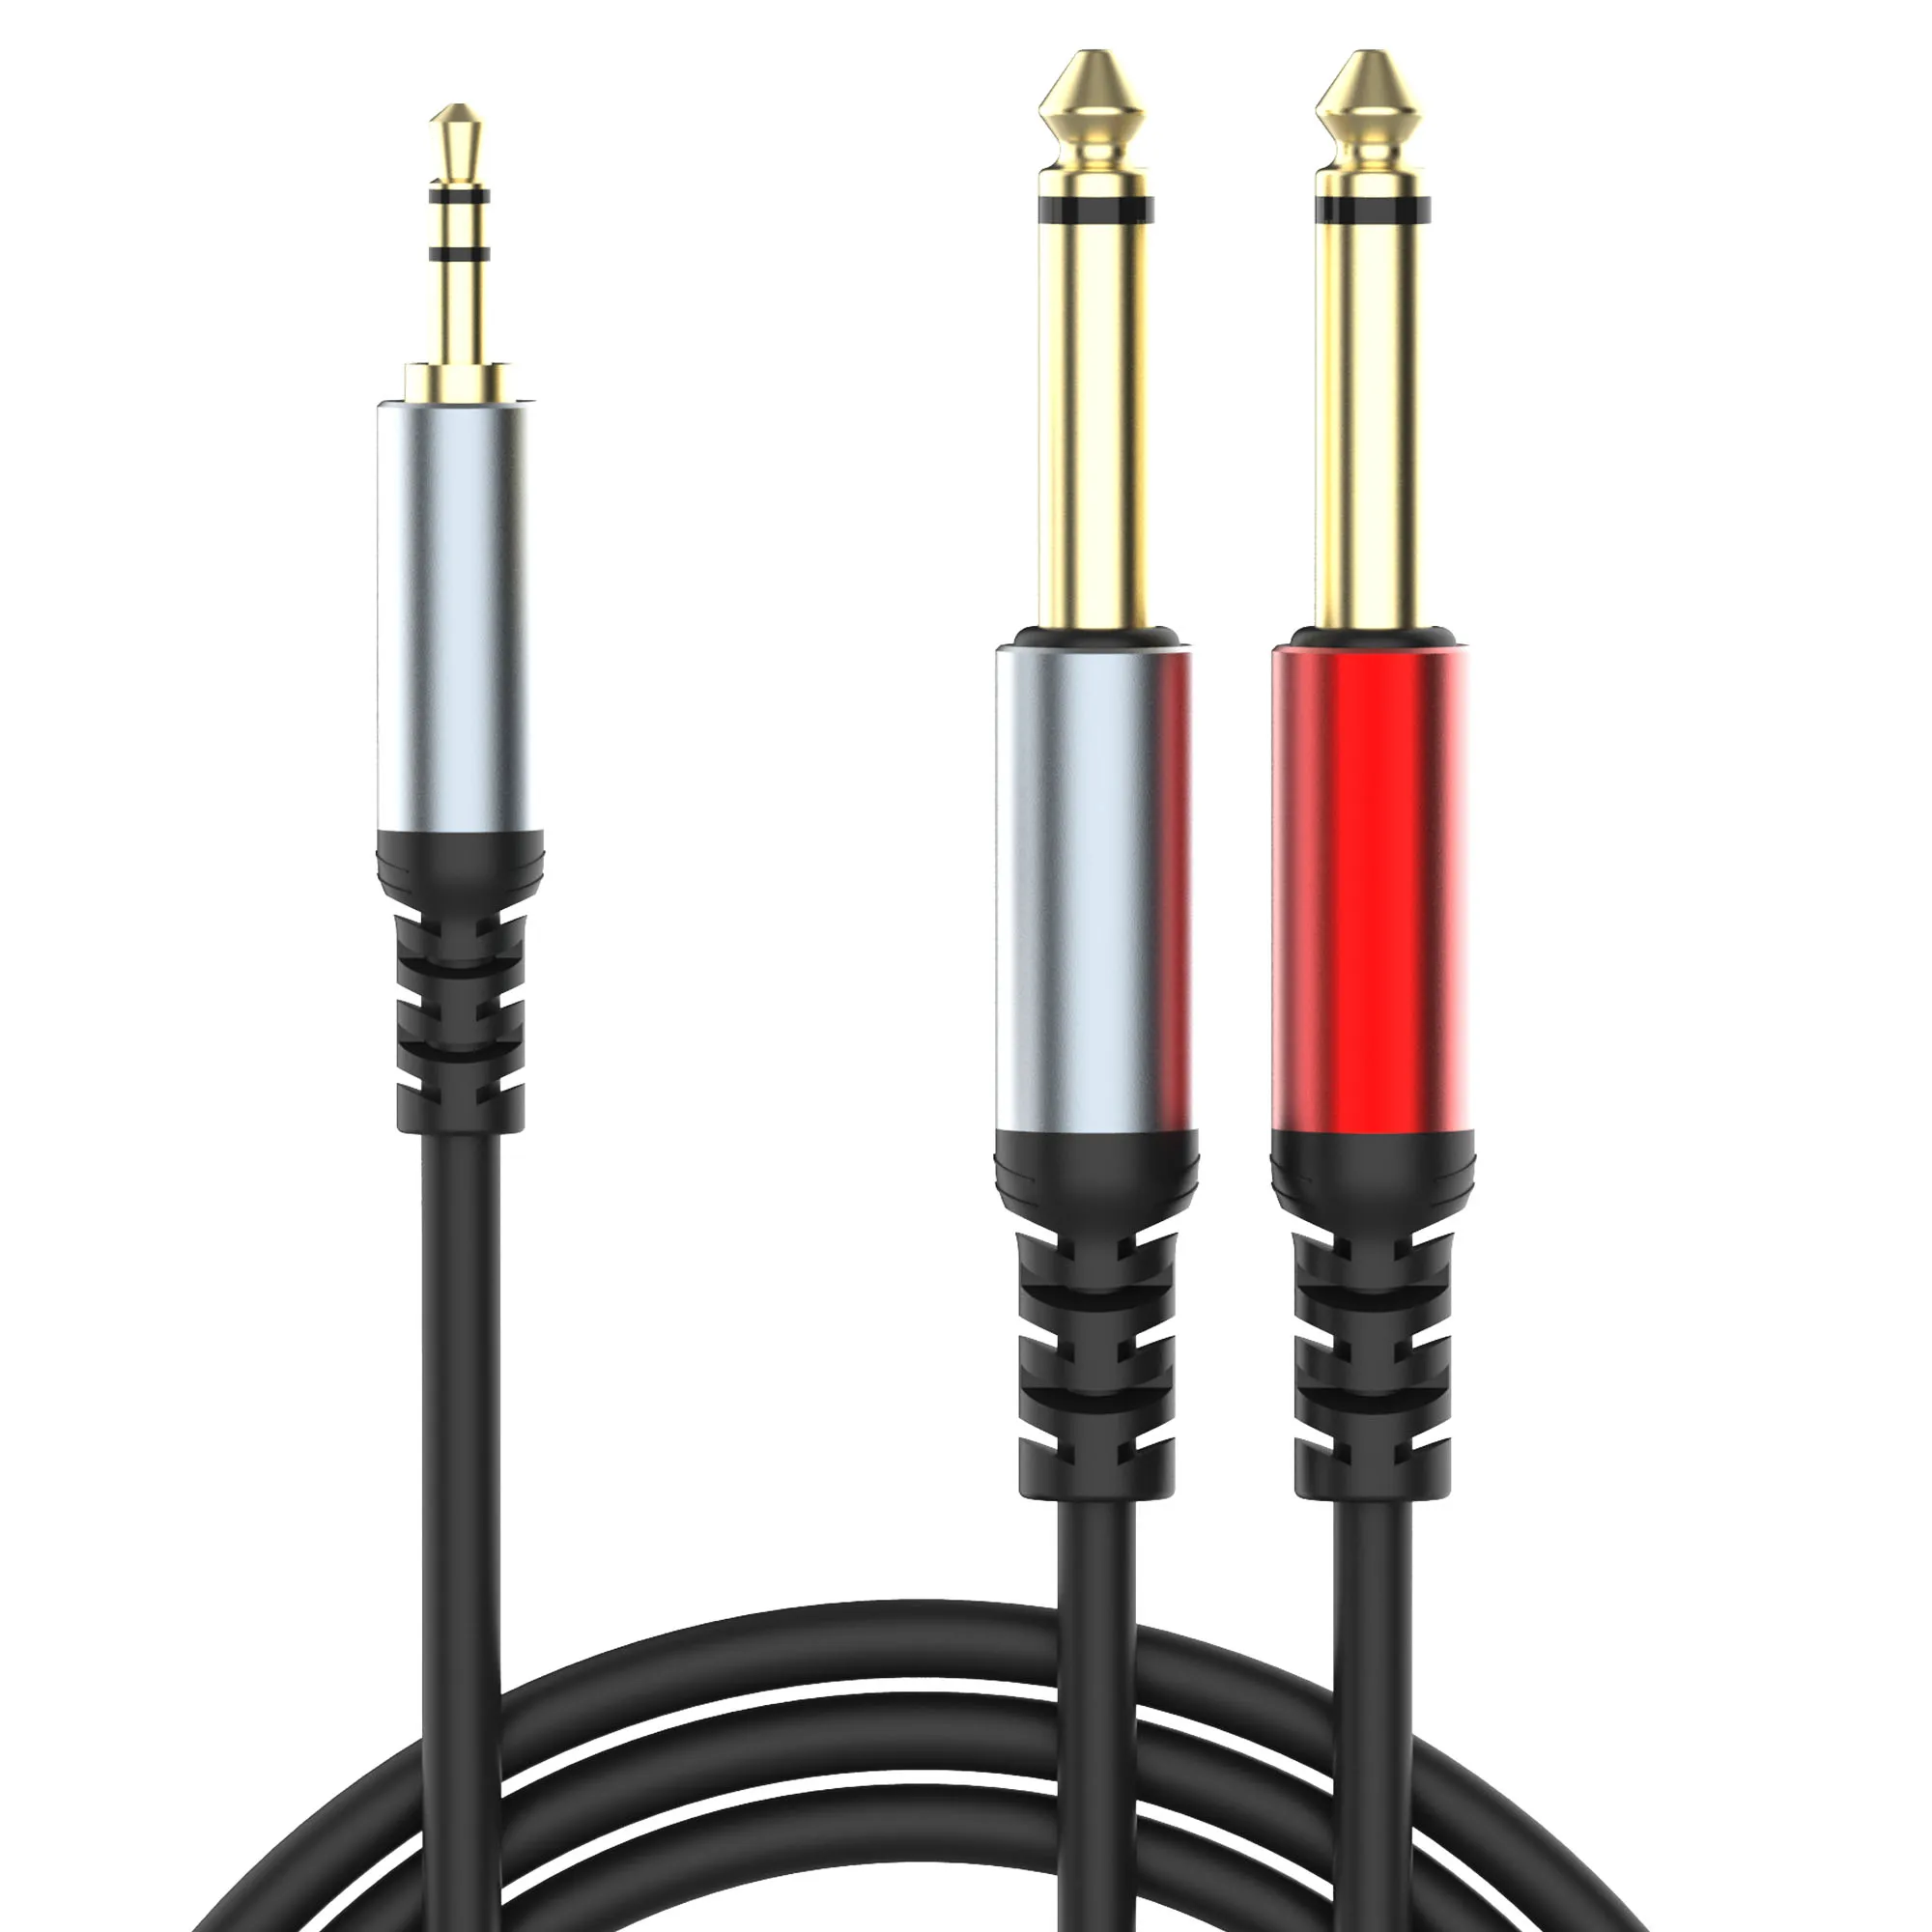 AUDIO AUX 3.5MM MALE TO DOUBLE JACK 6.5MM MALE MONO CABLE AJACK-01 1.5